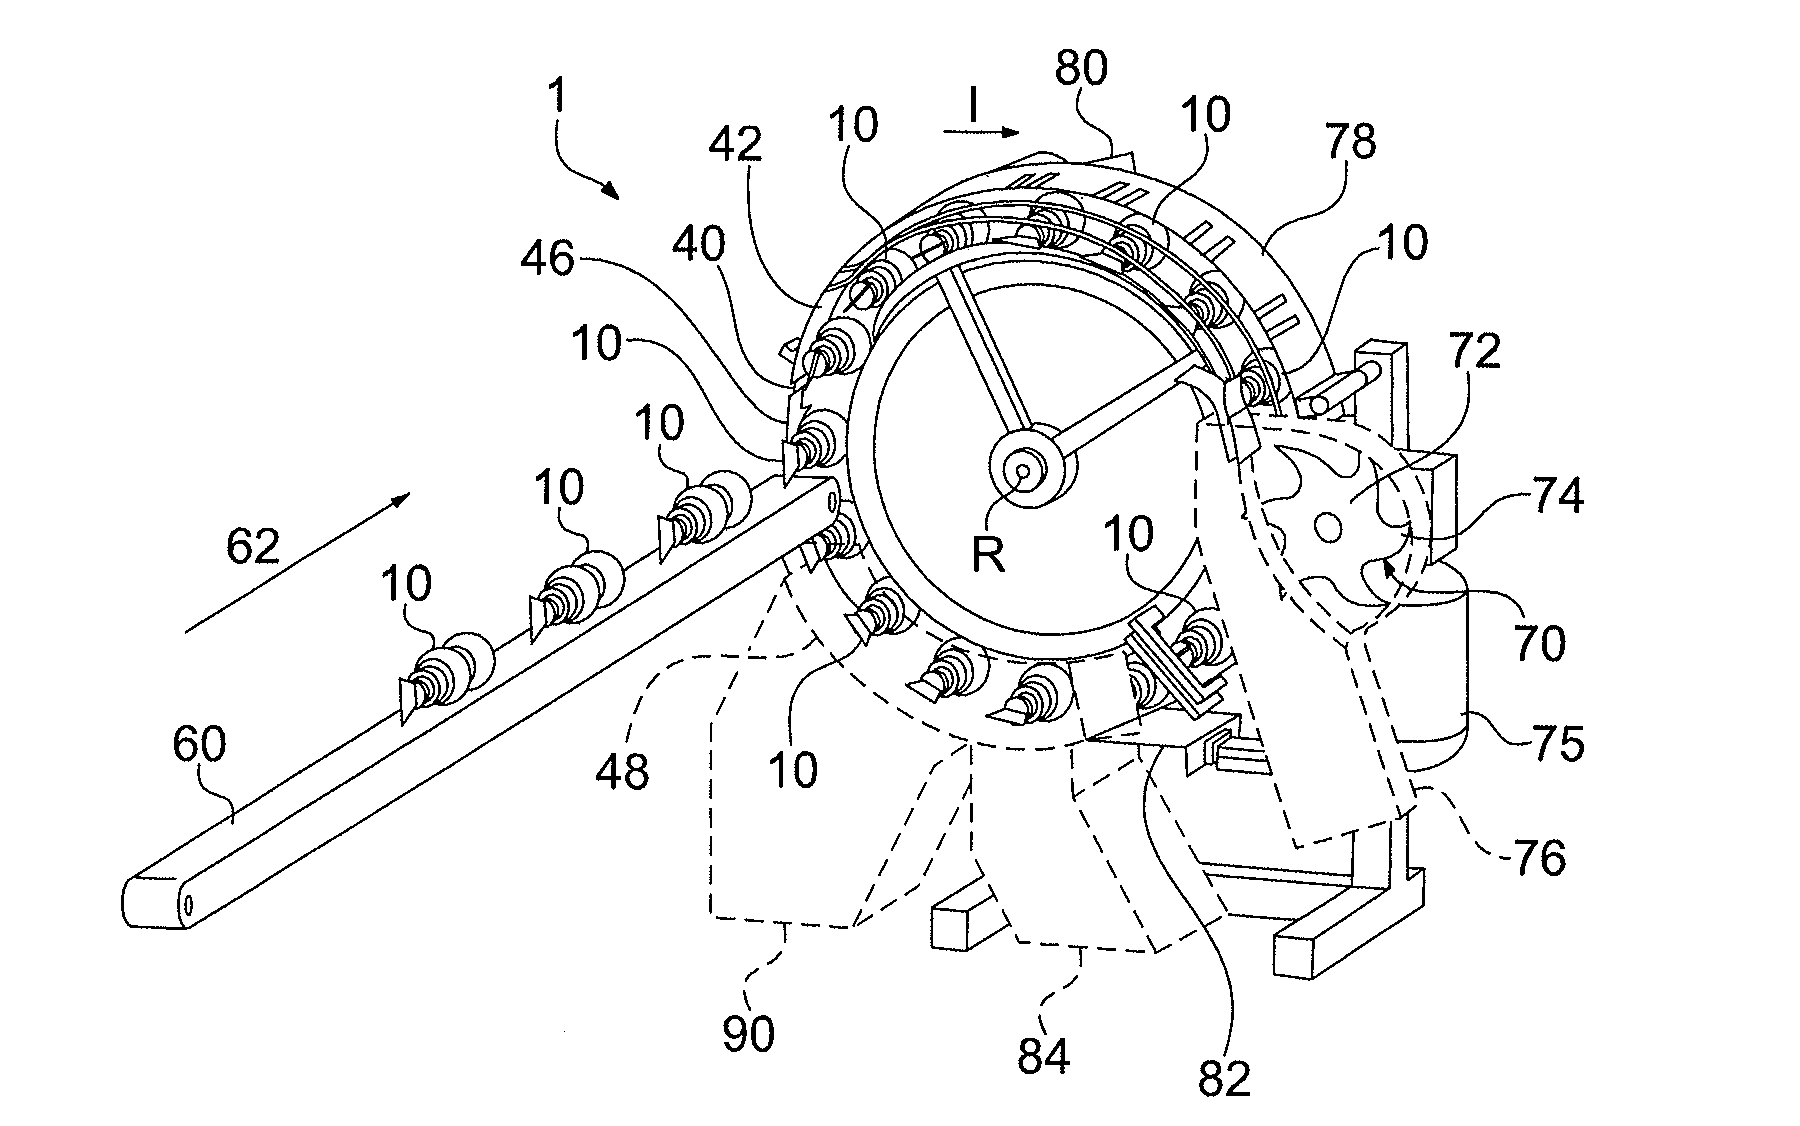 Automatic rotary transfer apparatus and method